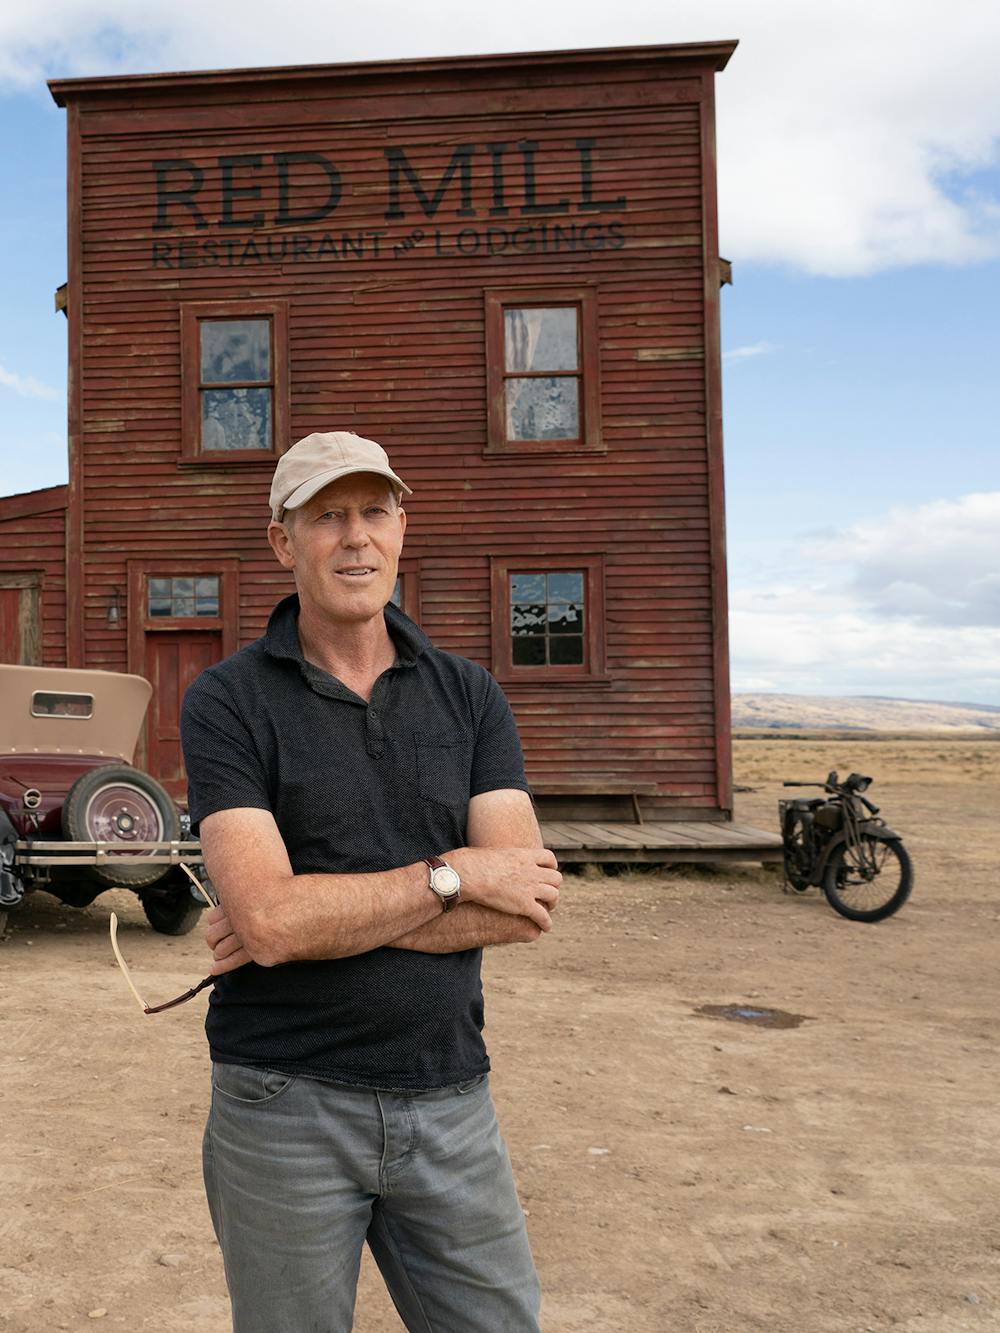 Grant Major stands outside the Red Mill set — which is on wheels — with his arms crossed. The sky is blue with puffy white clouds, the ground is sandy and dusty. Major wears a black polo shirt and grey pants. People and buggies dot the background.